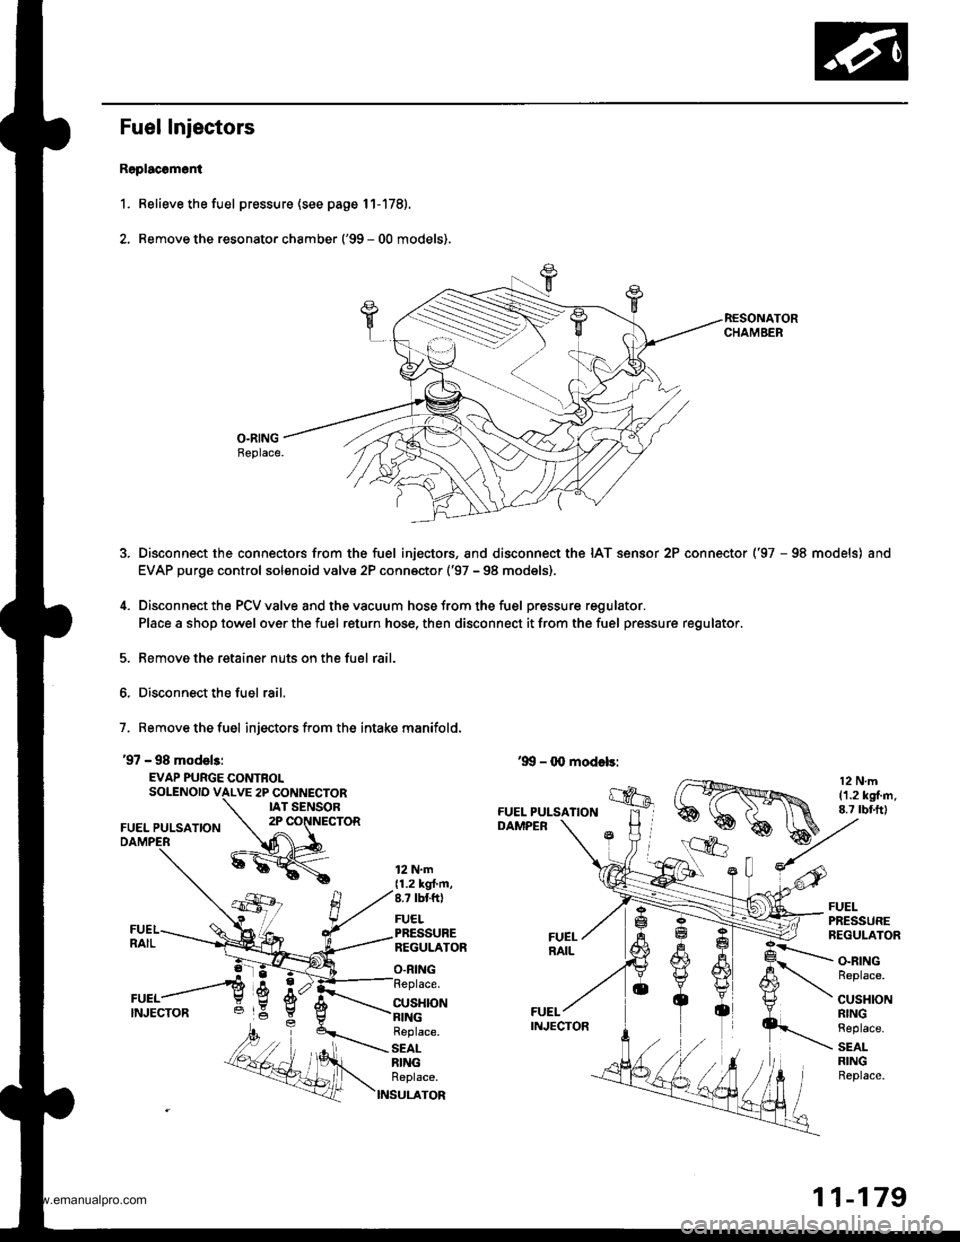 HONDA CR-V 2000 RD1-RD3 / 1.G Workshop Manual 
Fuel Injectors
R6placomoni
1. Relieve the fuel pressure (see page 11-178).
2. Remove the resonato. chamber (99 - 00 models).
O.RINGBeplace.
Disconnect the connectors from the fuel injectors, and dis